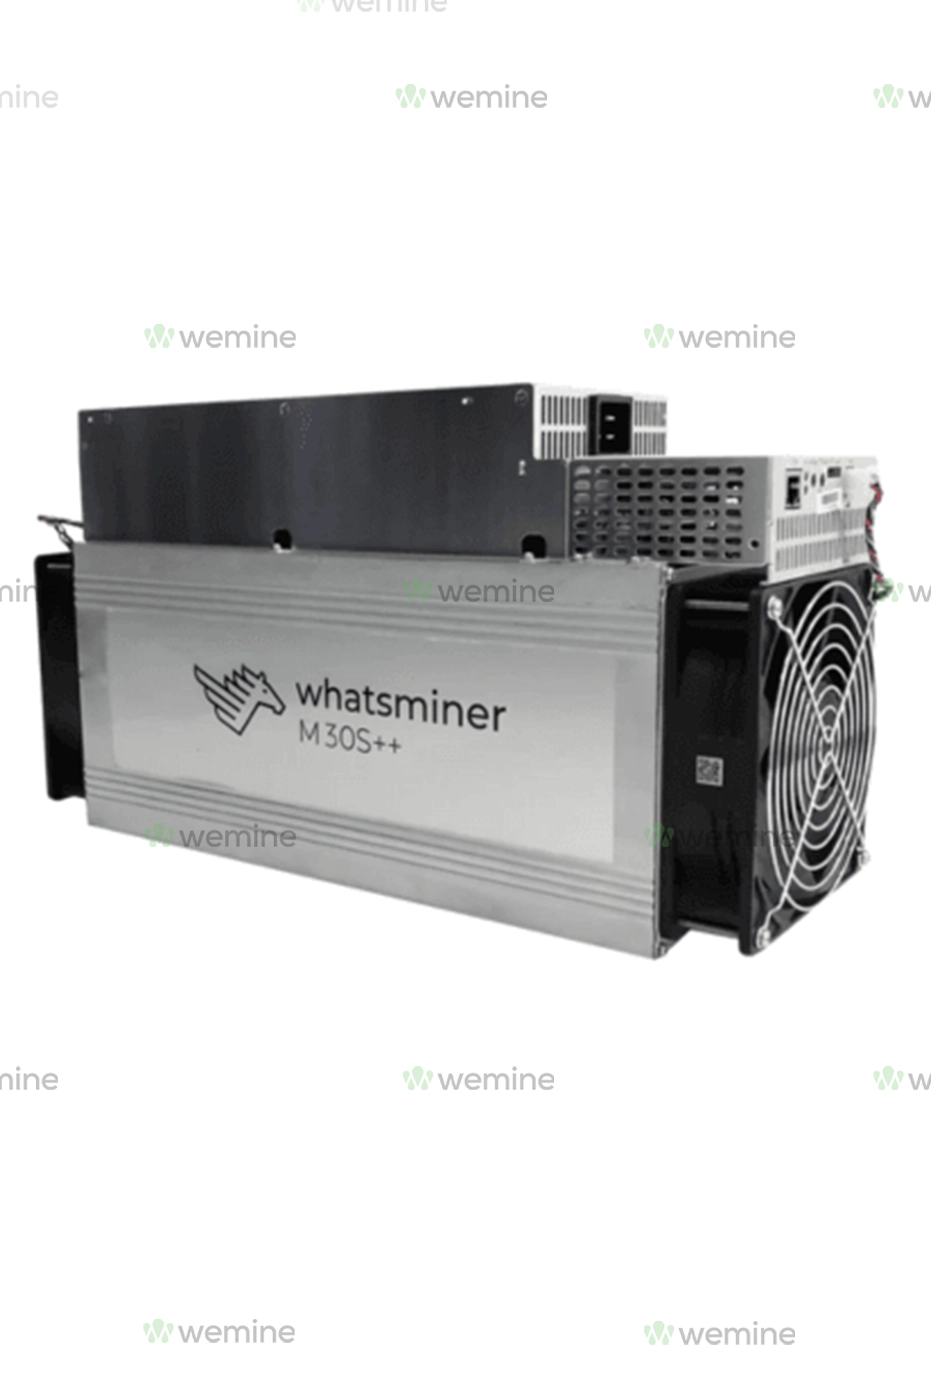 A powerful cryptocurrency miner, the Whatsminer M30S++, with a large cooling fan on its right and a heat sink visible on the top, indicating advanced thermal management capabilities.